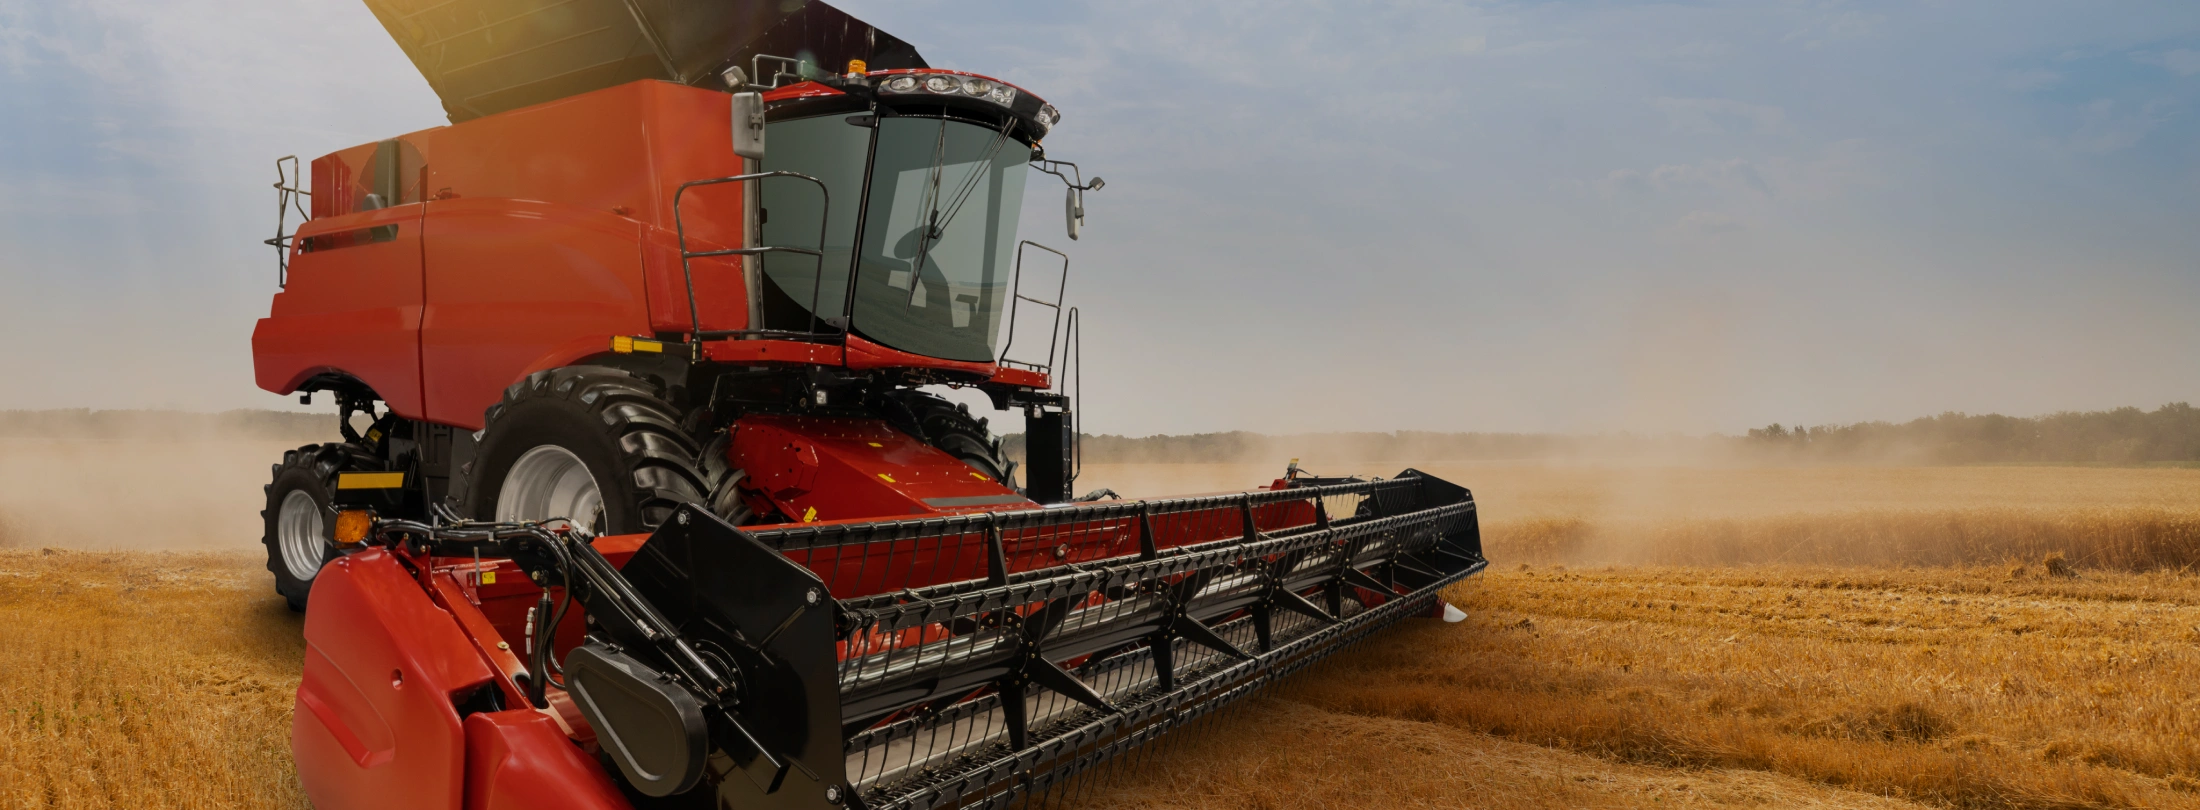 Design of agricultural machines, special machines